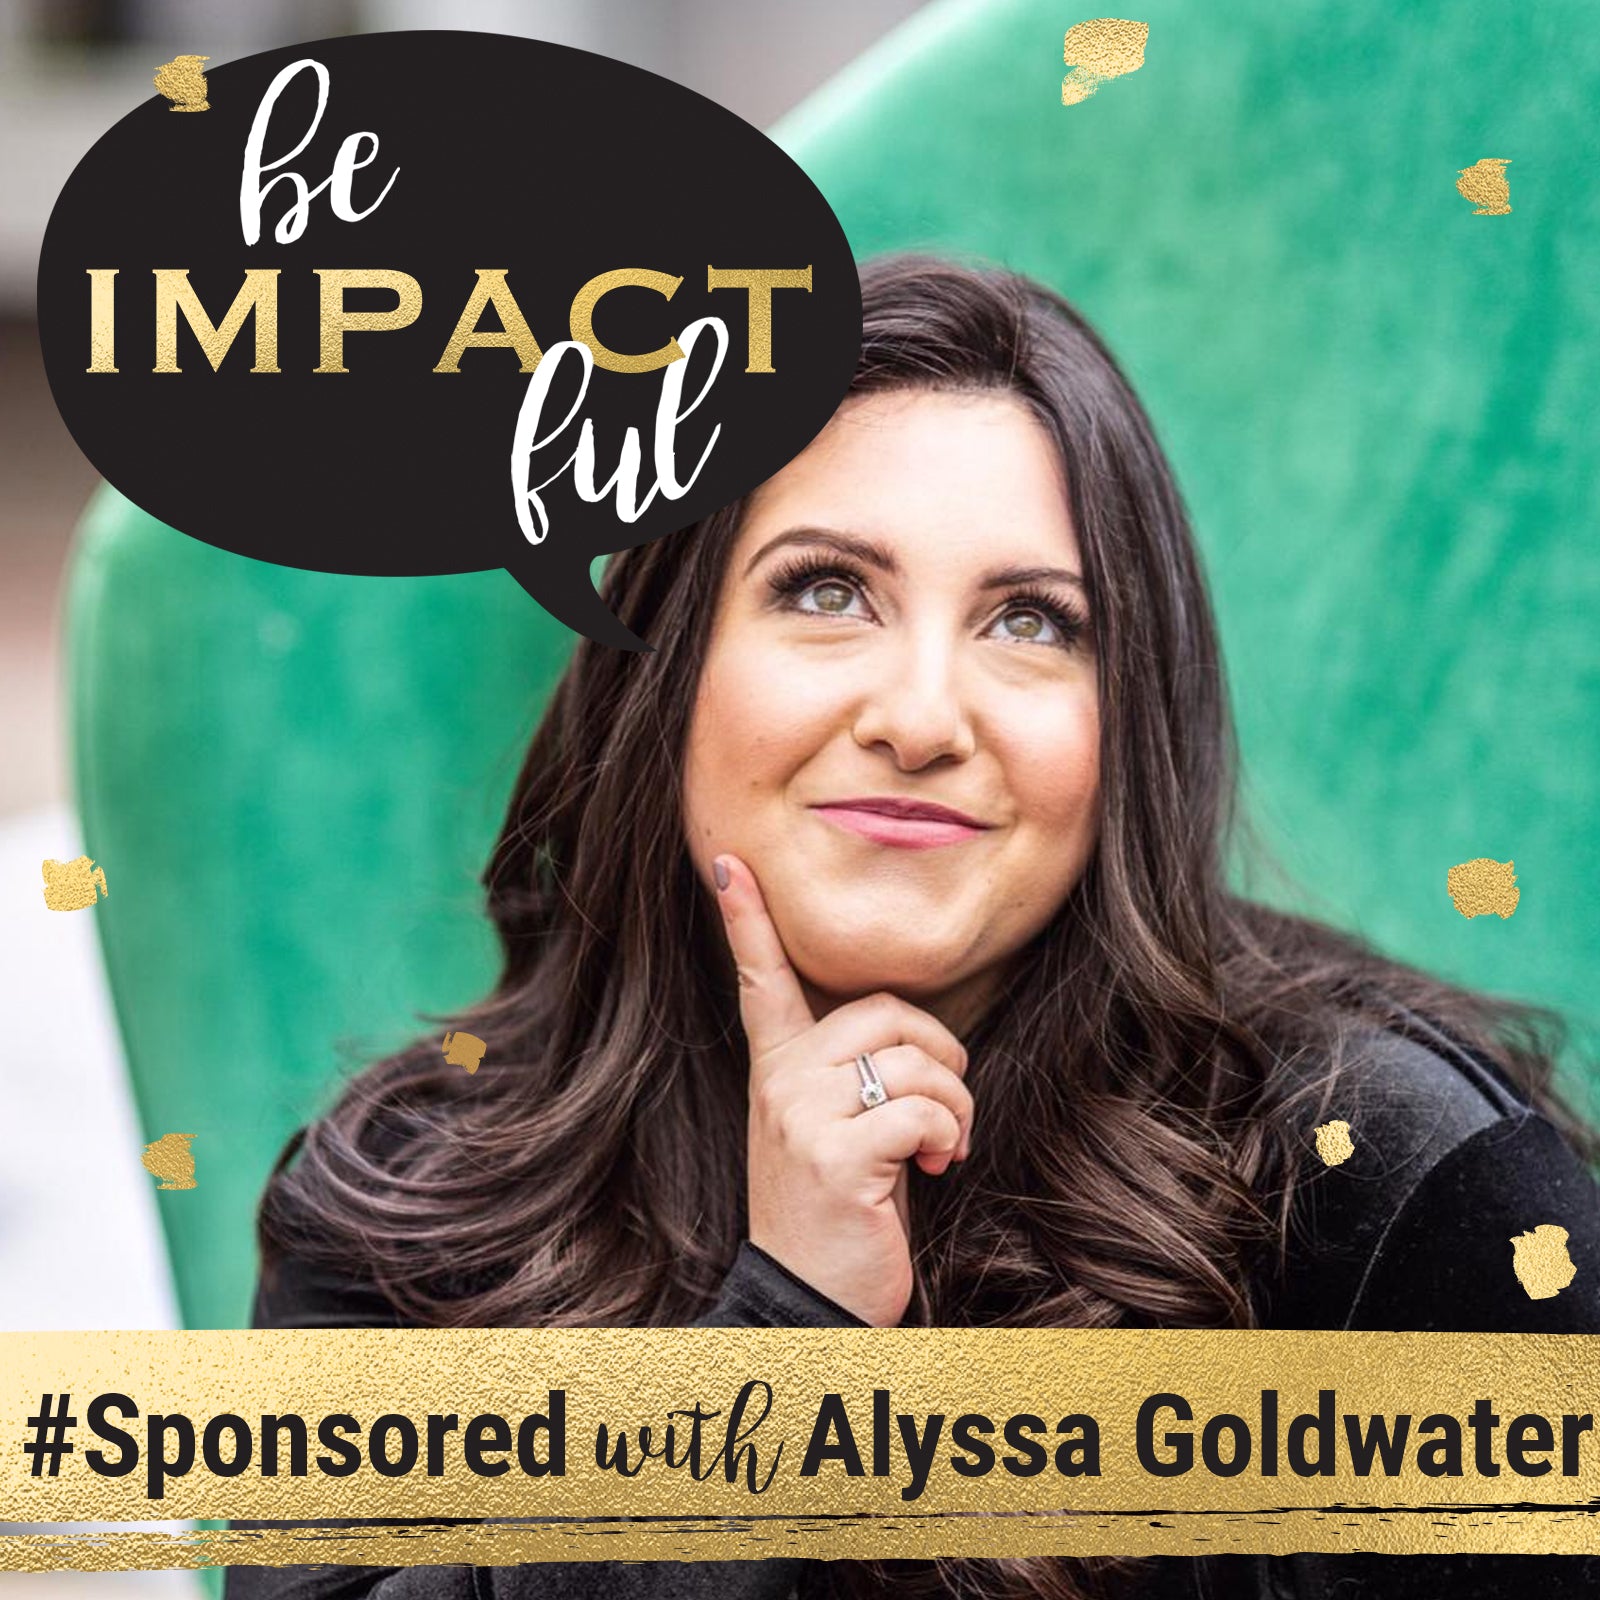 # Sponsored with Alyssa Goldwater